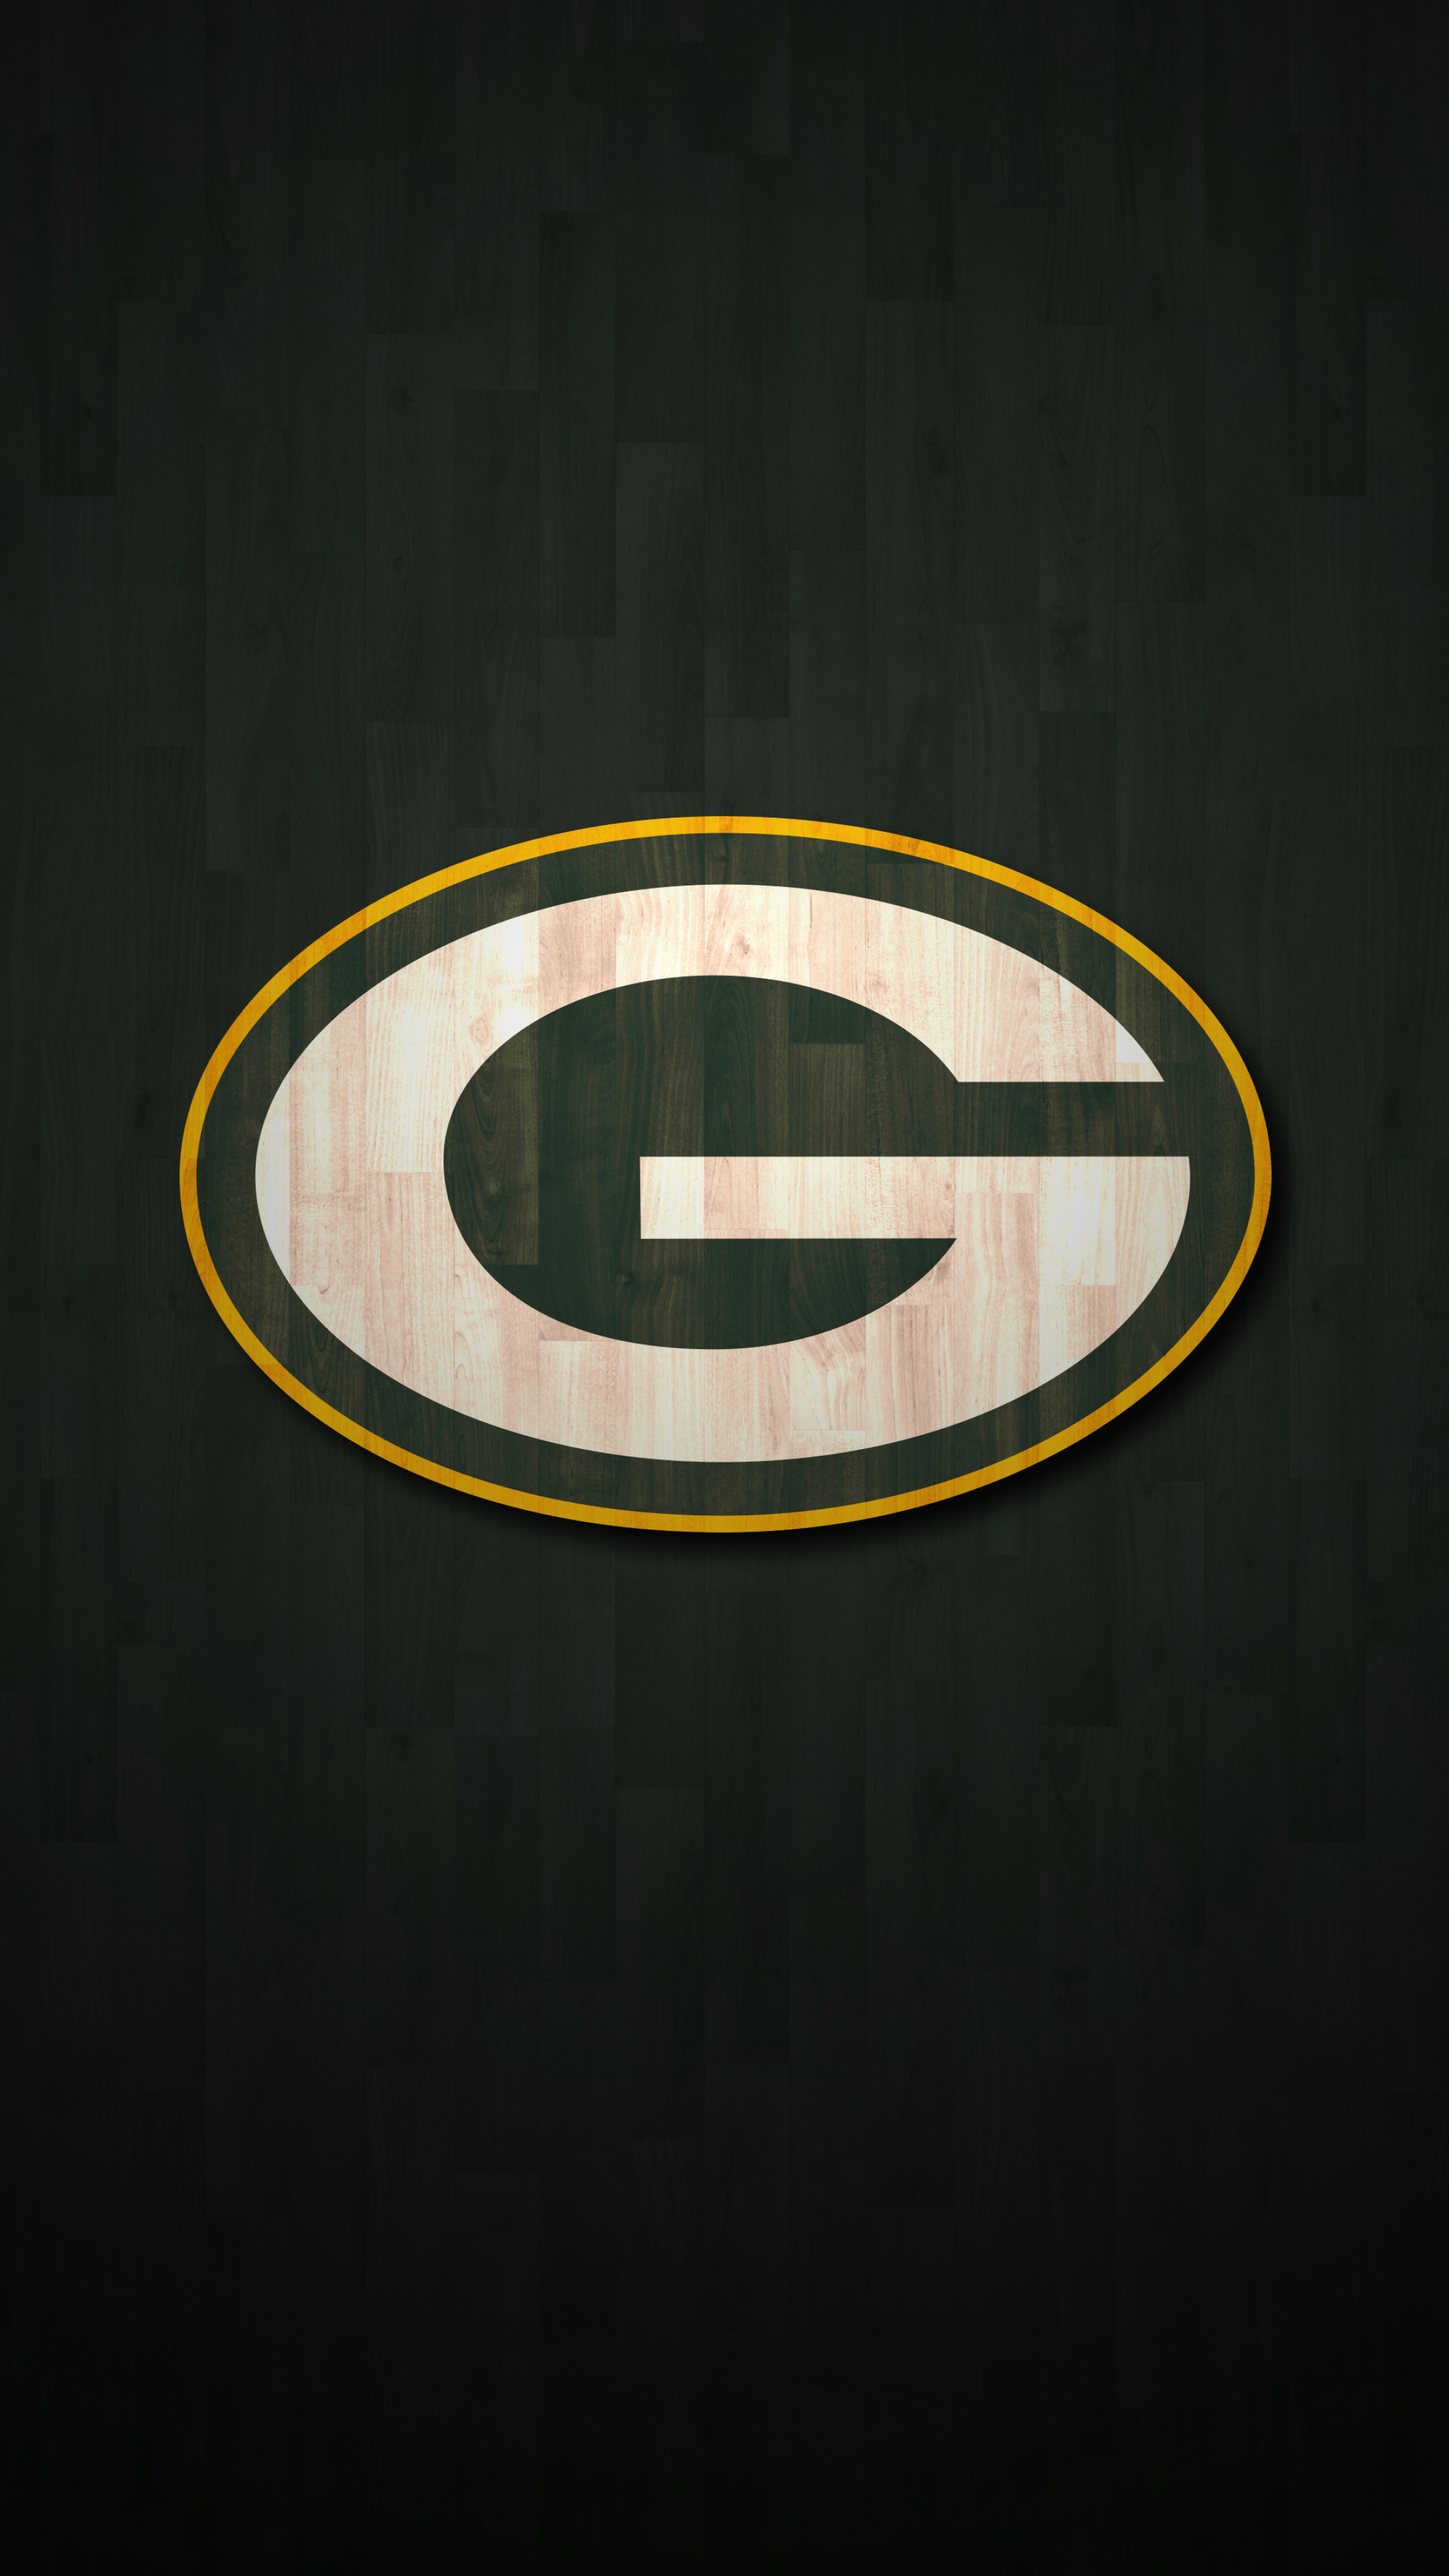 Green Bay Packers, Popular wallpapers, Football backgrounds, Team pride, 2160x3840 4K Phone